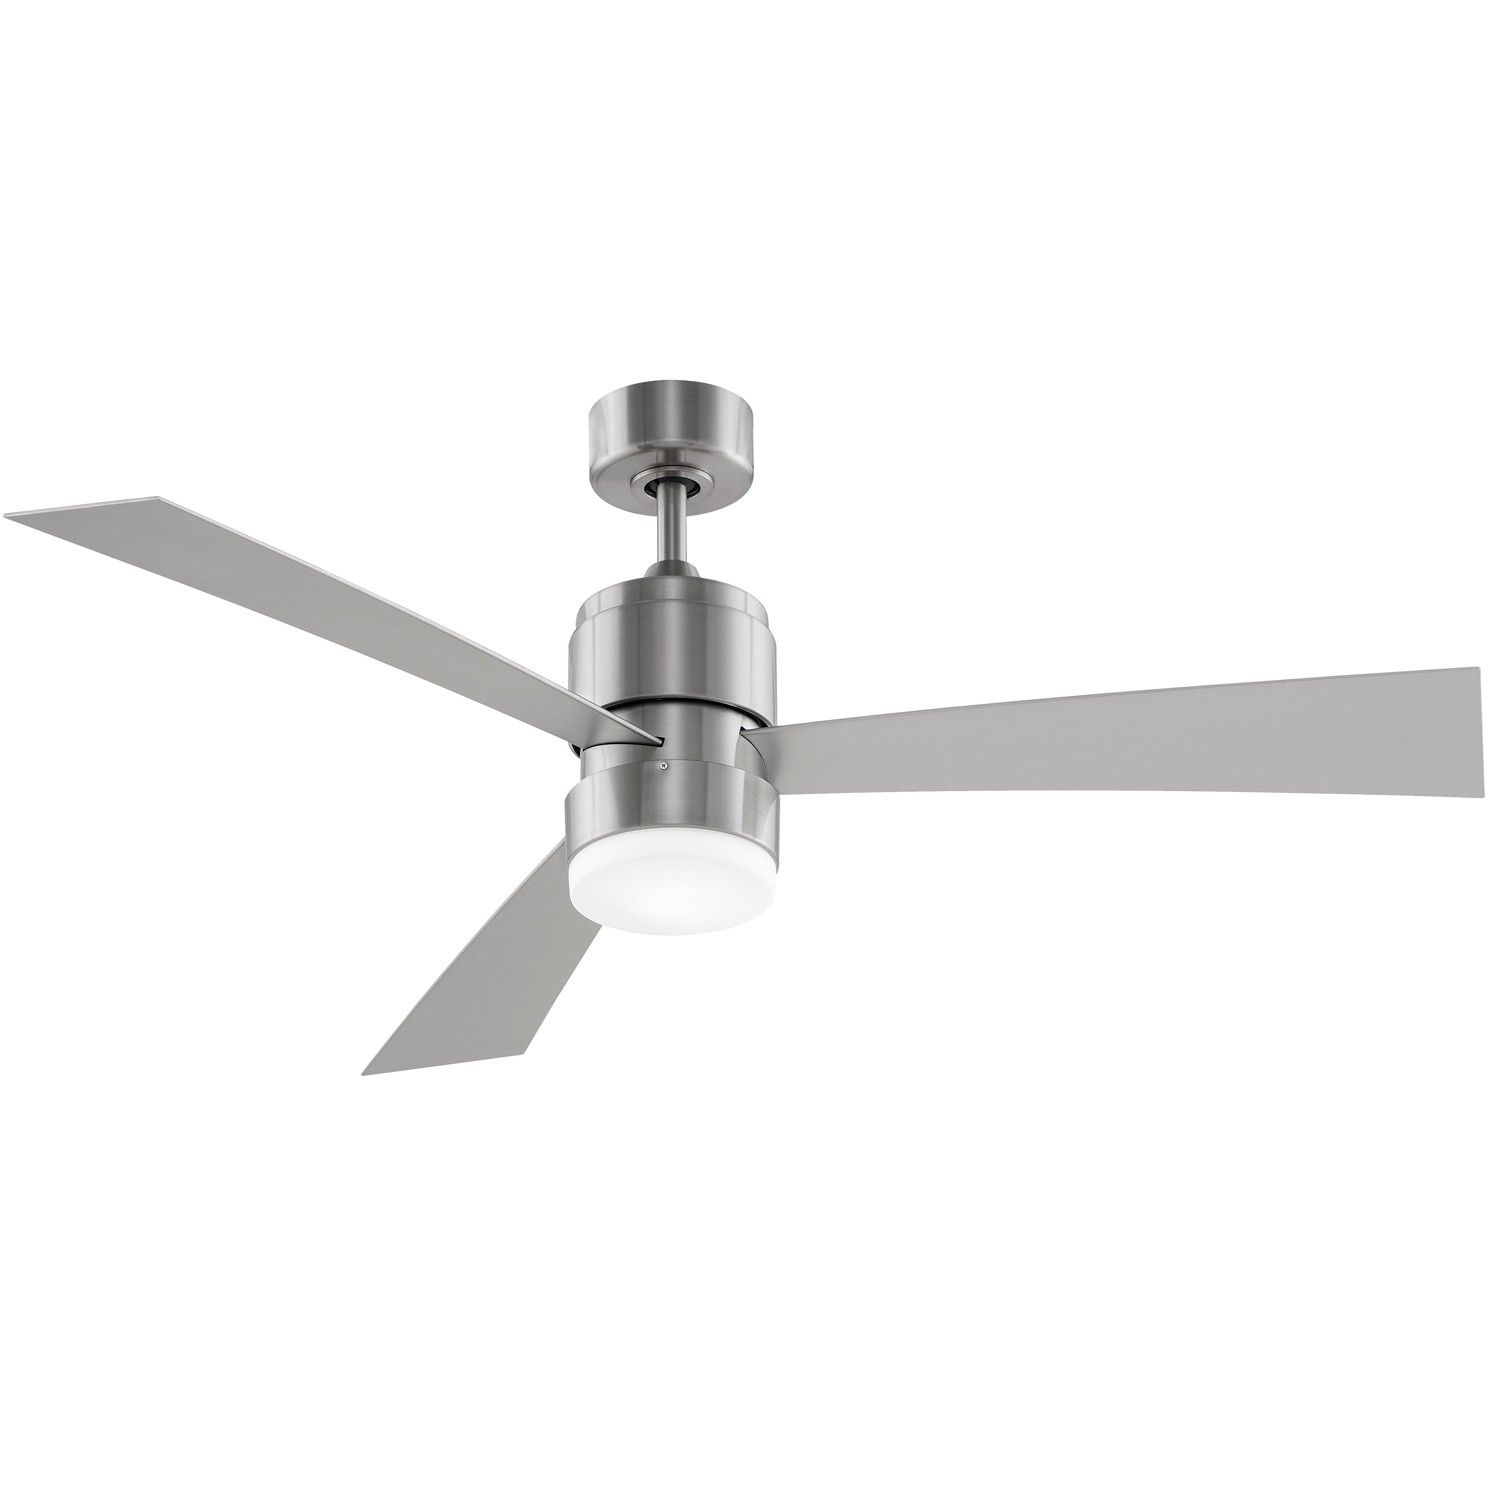 2018 Ebay Ceiling Fans (33 Photos) | Bathgroundspath In Outdoor Ceiling Fans With Lights At Ebay (View 3 of 15)